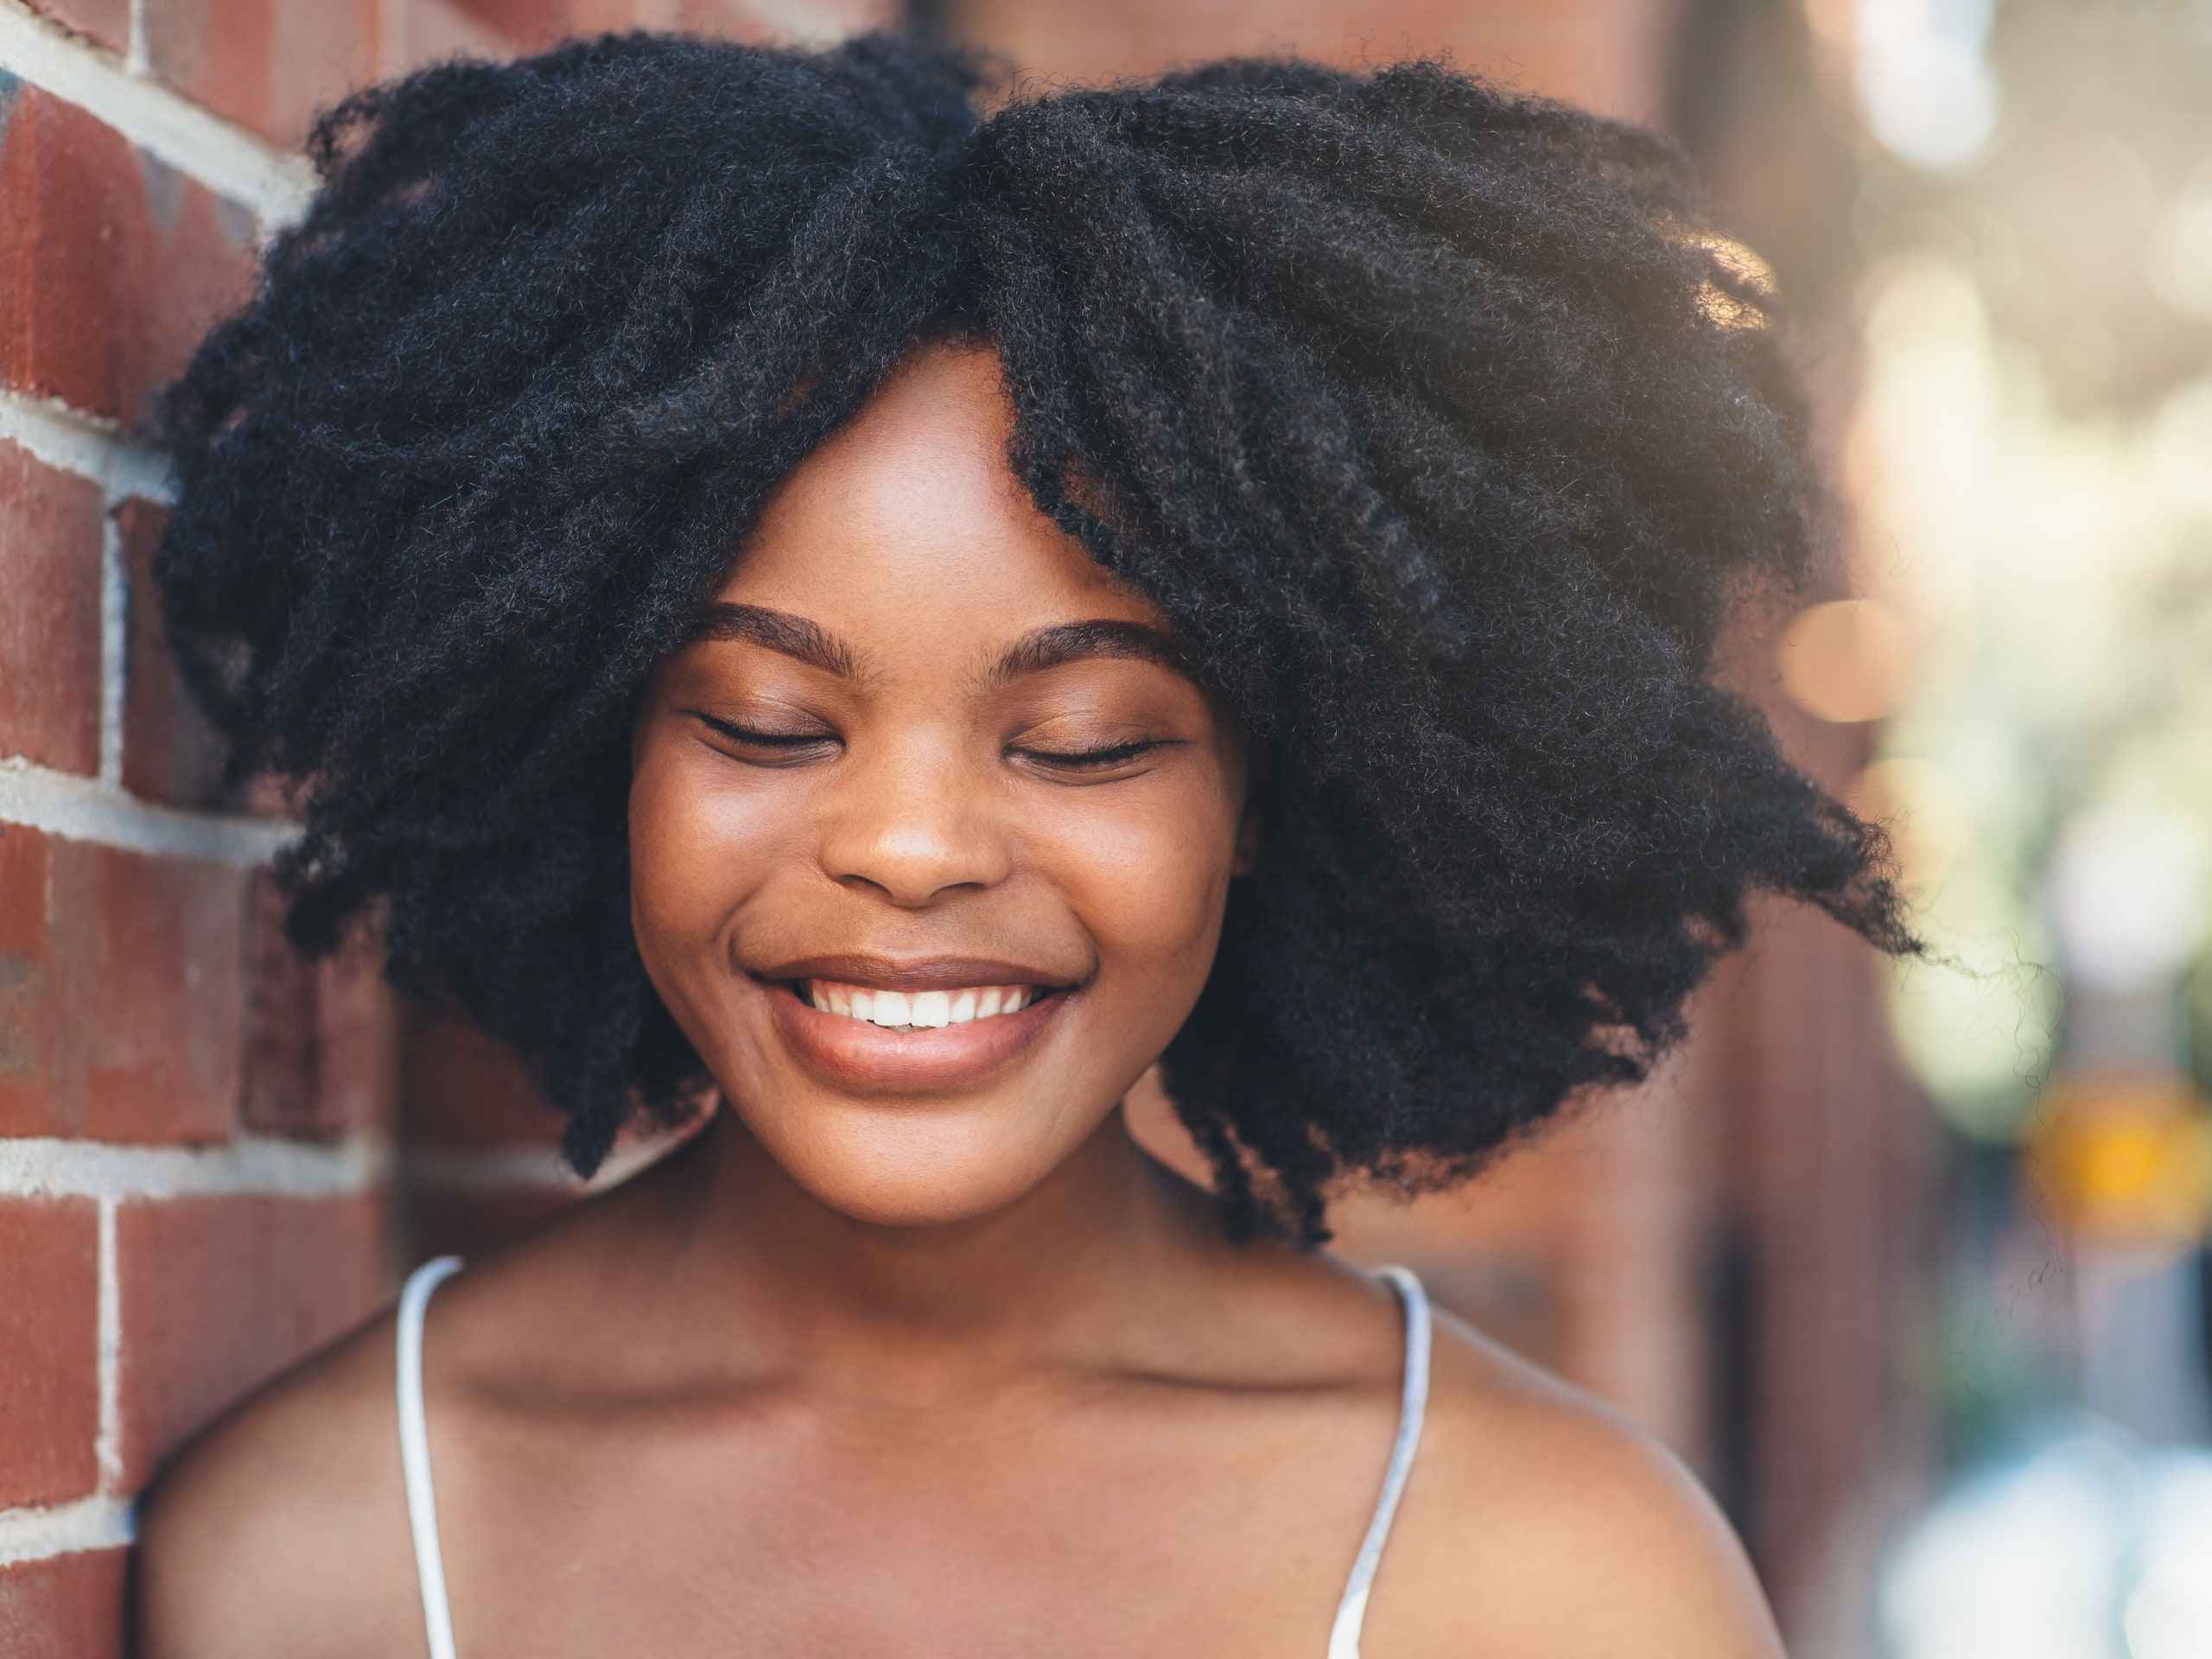 6 Things I've Learned About Taking Care of My Dark Skin